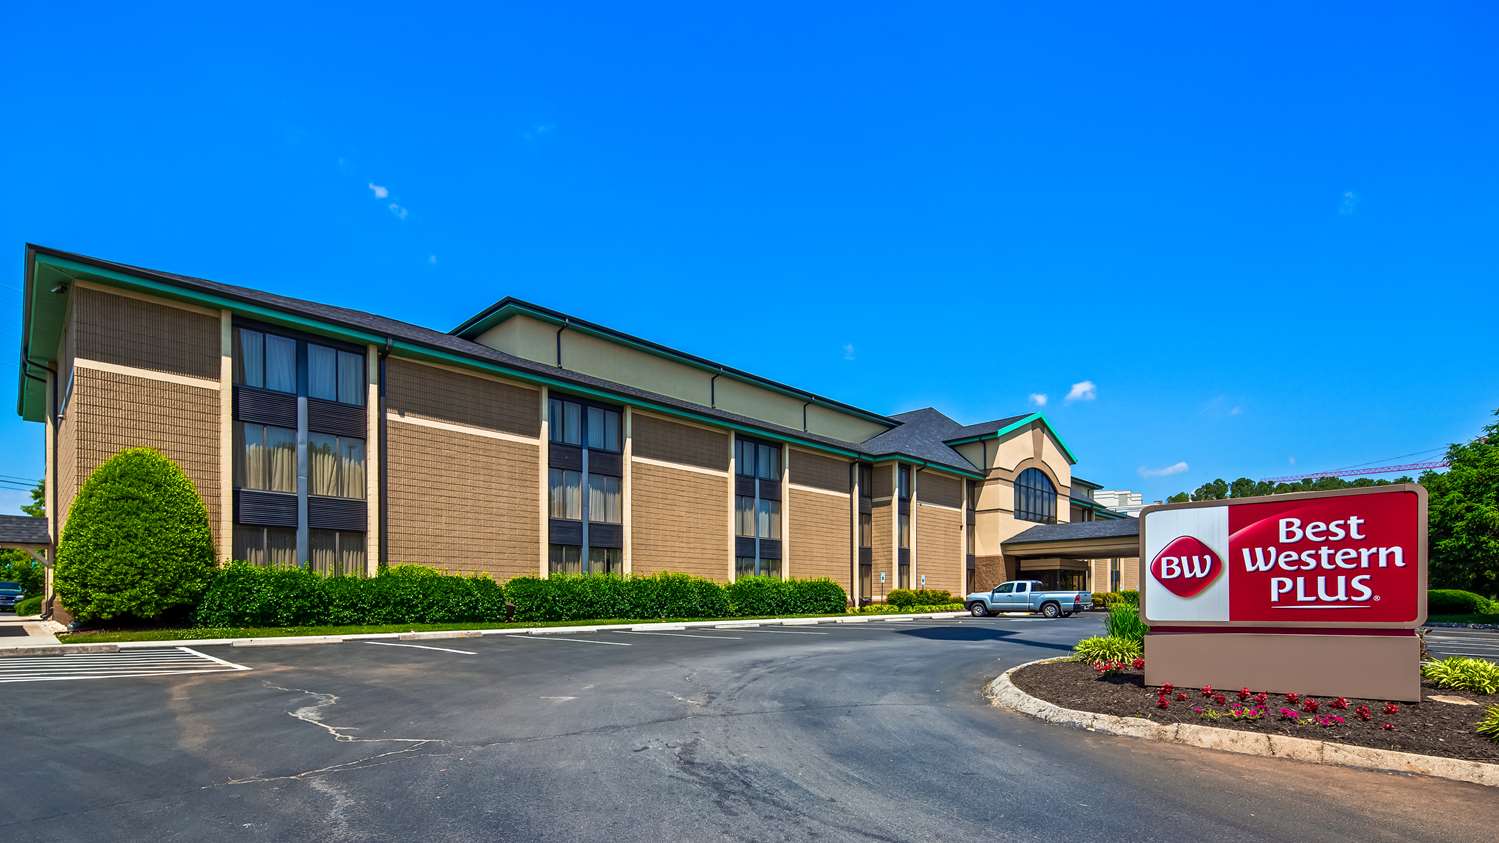 Promo [85% Off] Holiday Inn Knoxville West Cedar Bluff United States